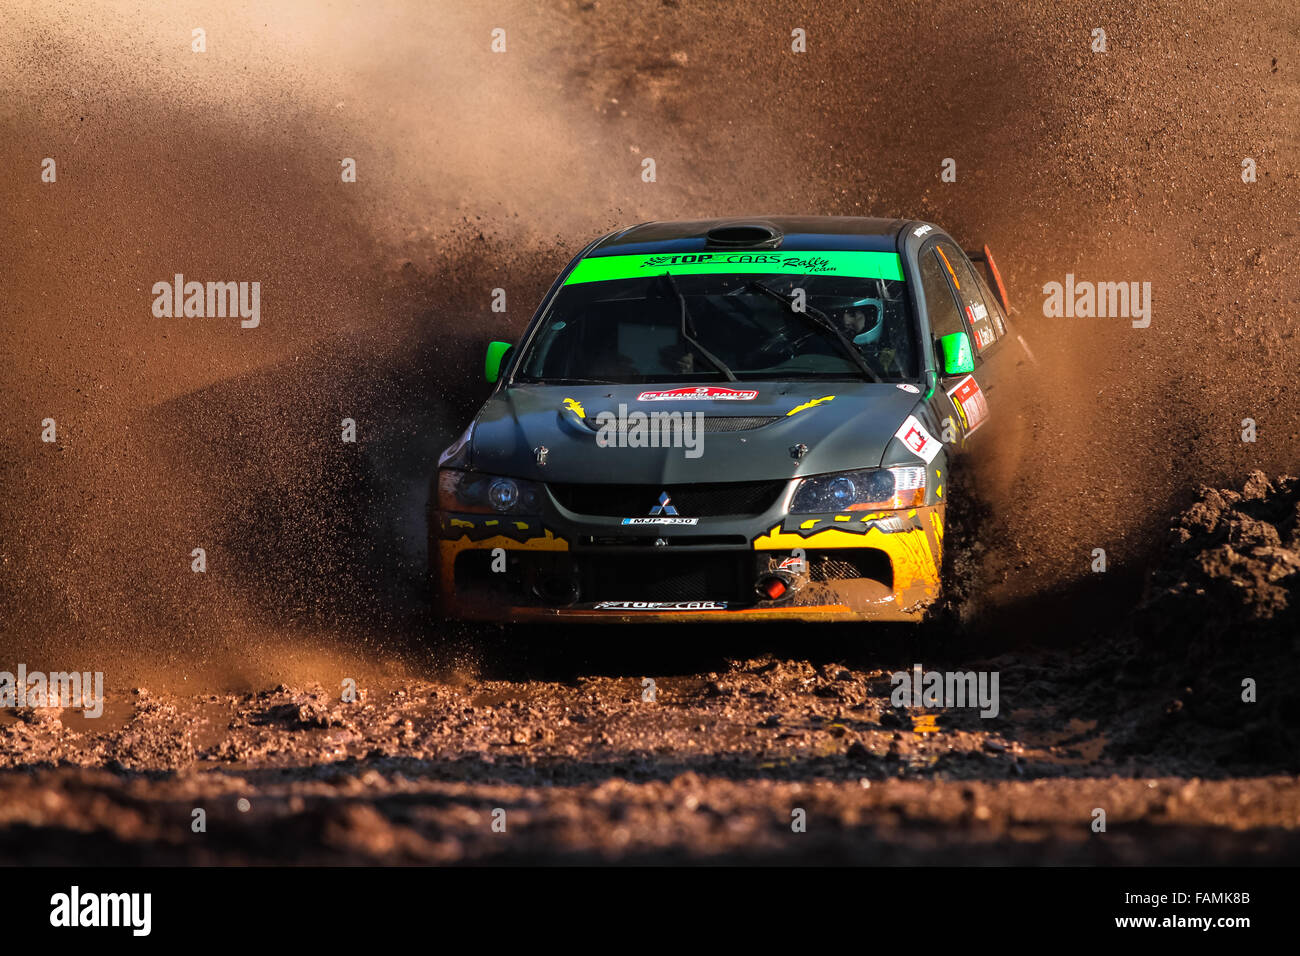 Rally Car Mud Spray High Resolution Stock Photography and Images - Alamy